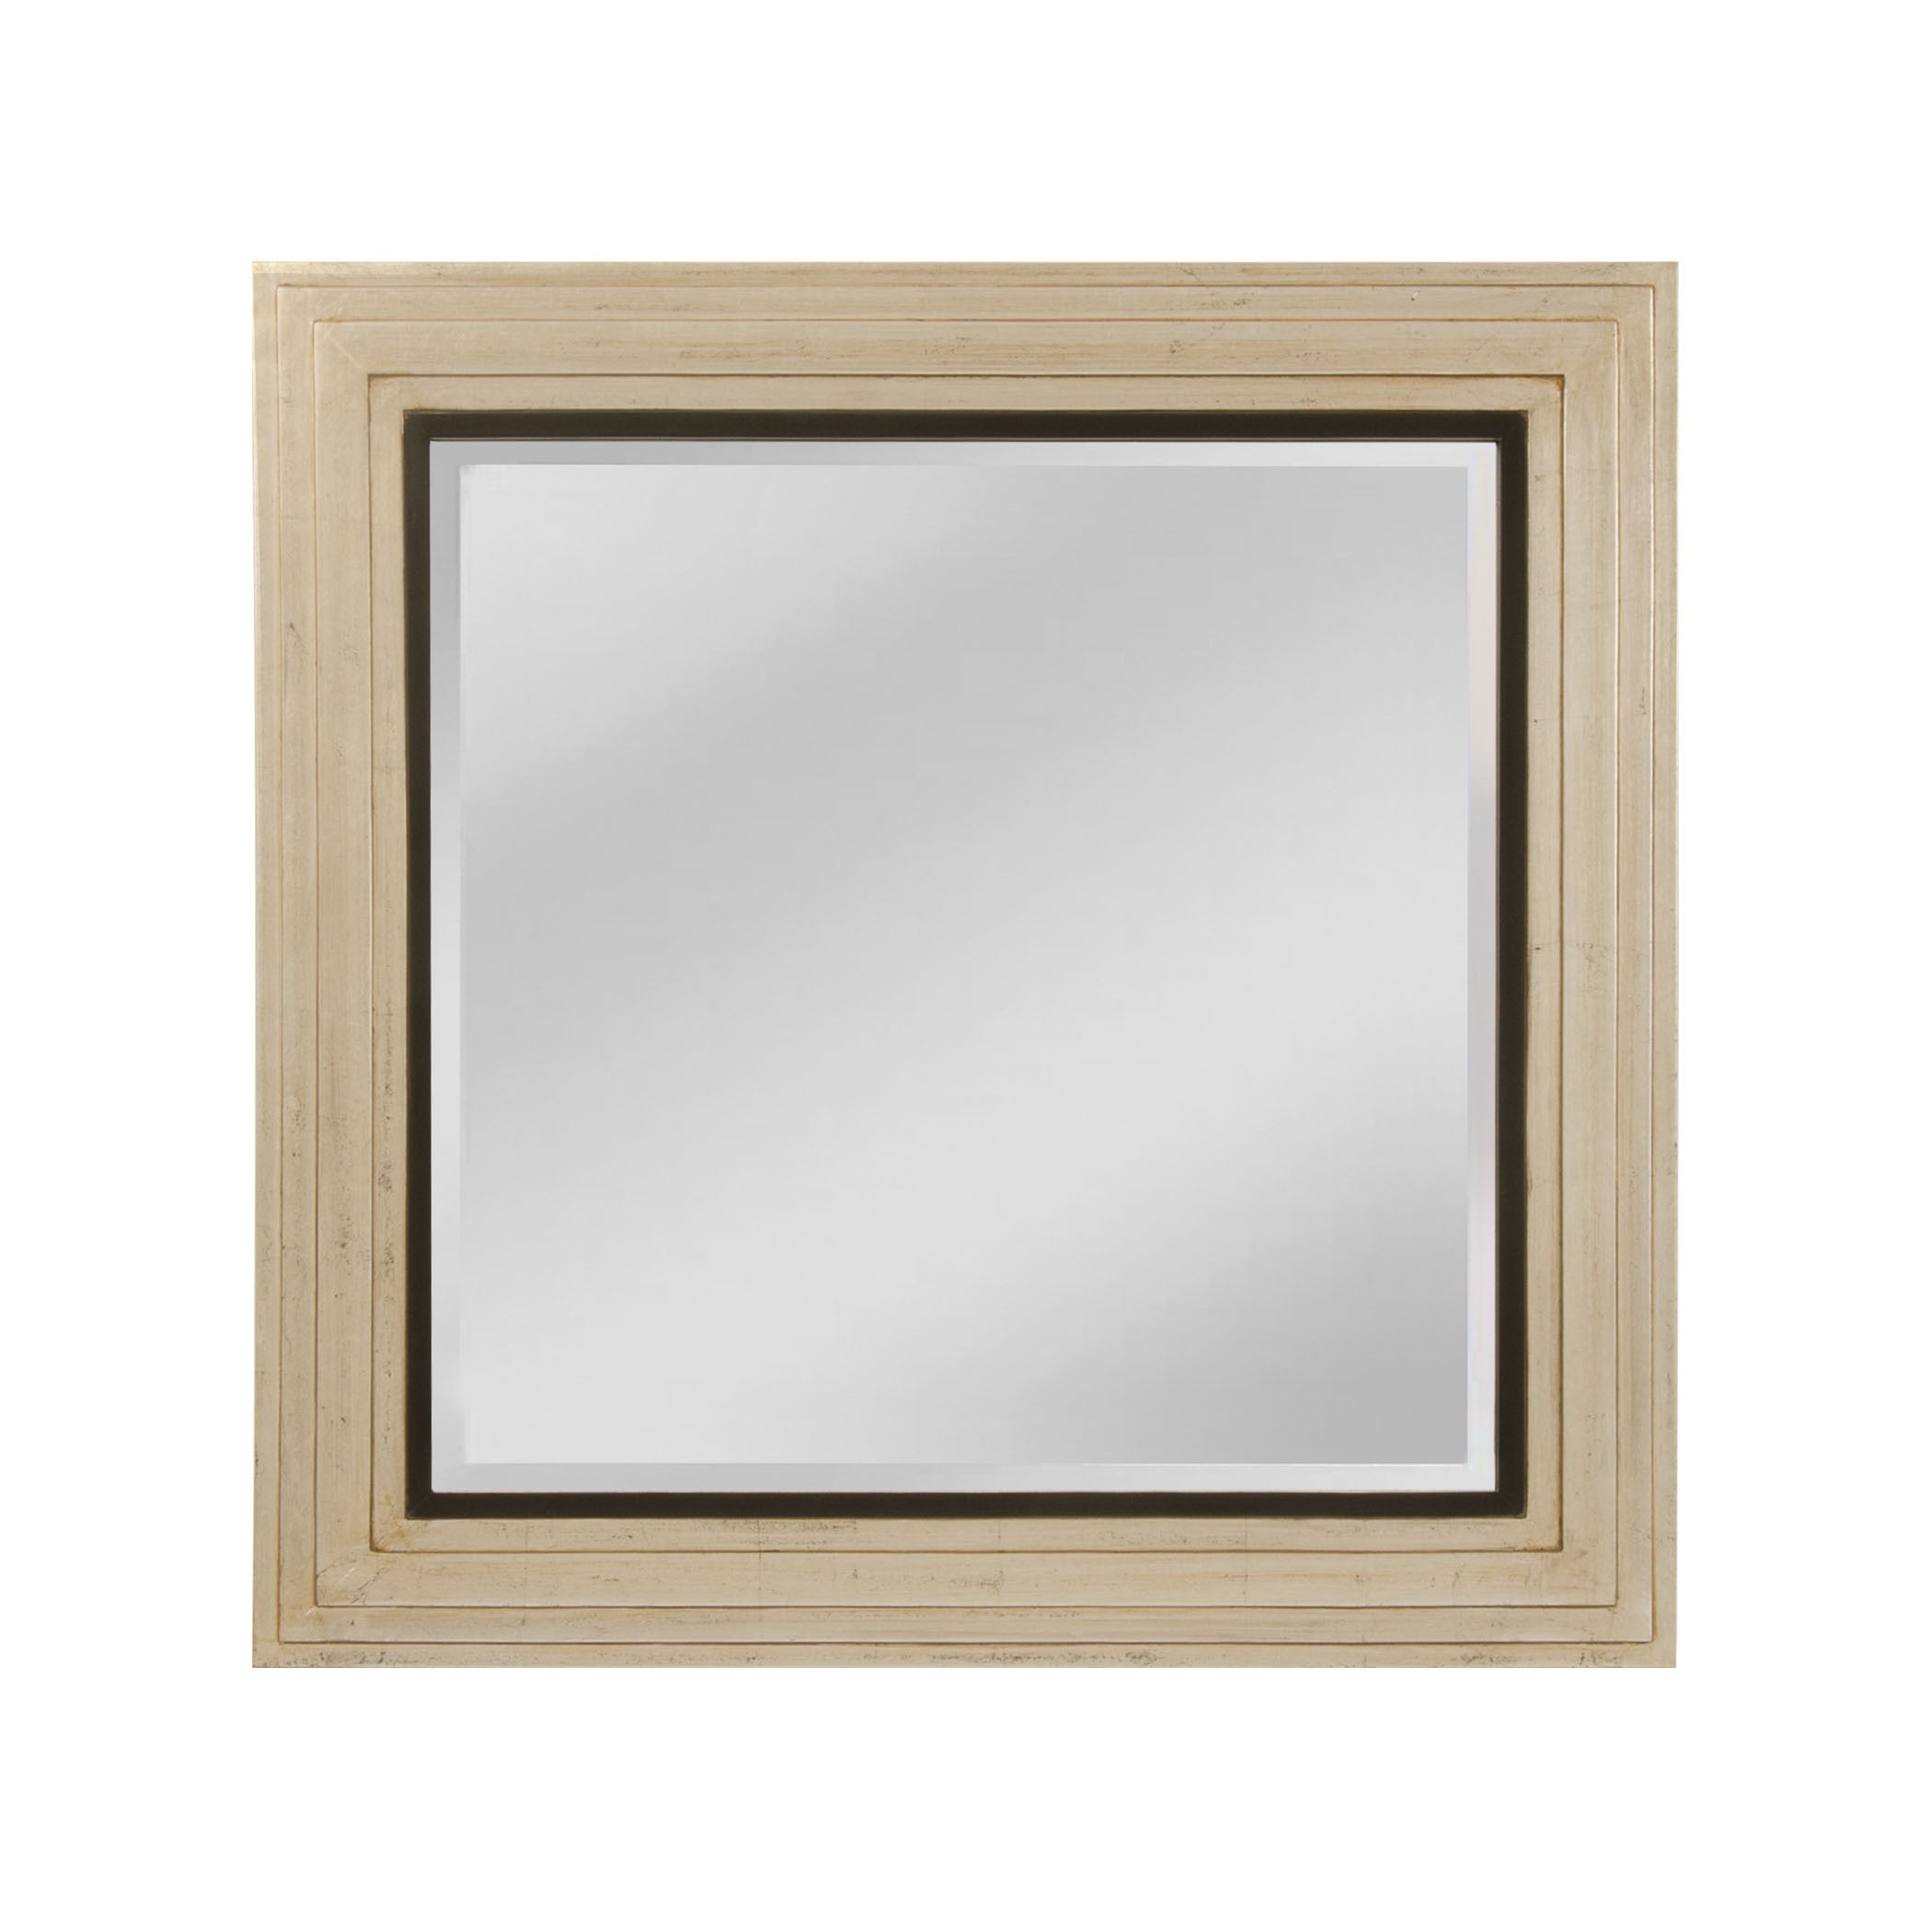 Mirror Masters Mw4069a-0057 Sheldon Collection Shining Silver,gold Mist,black Finish Wall Mirror